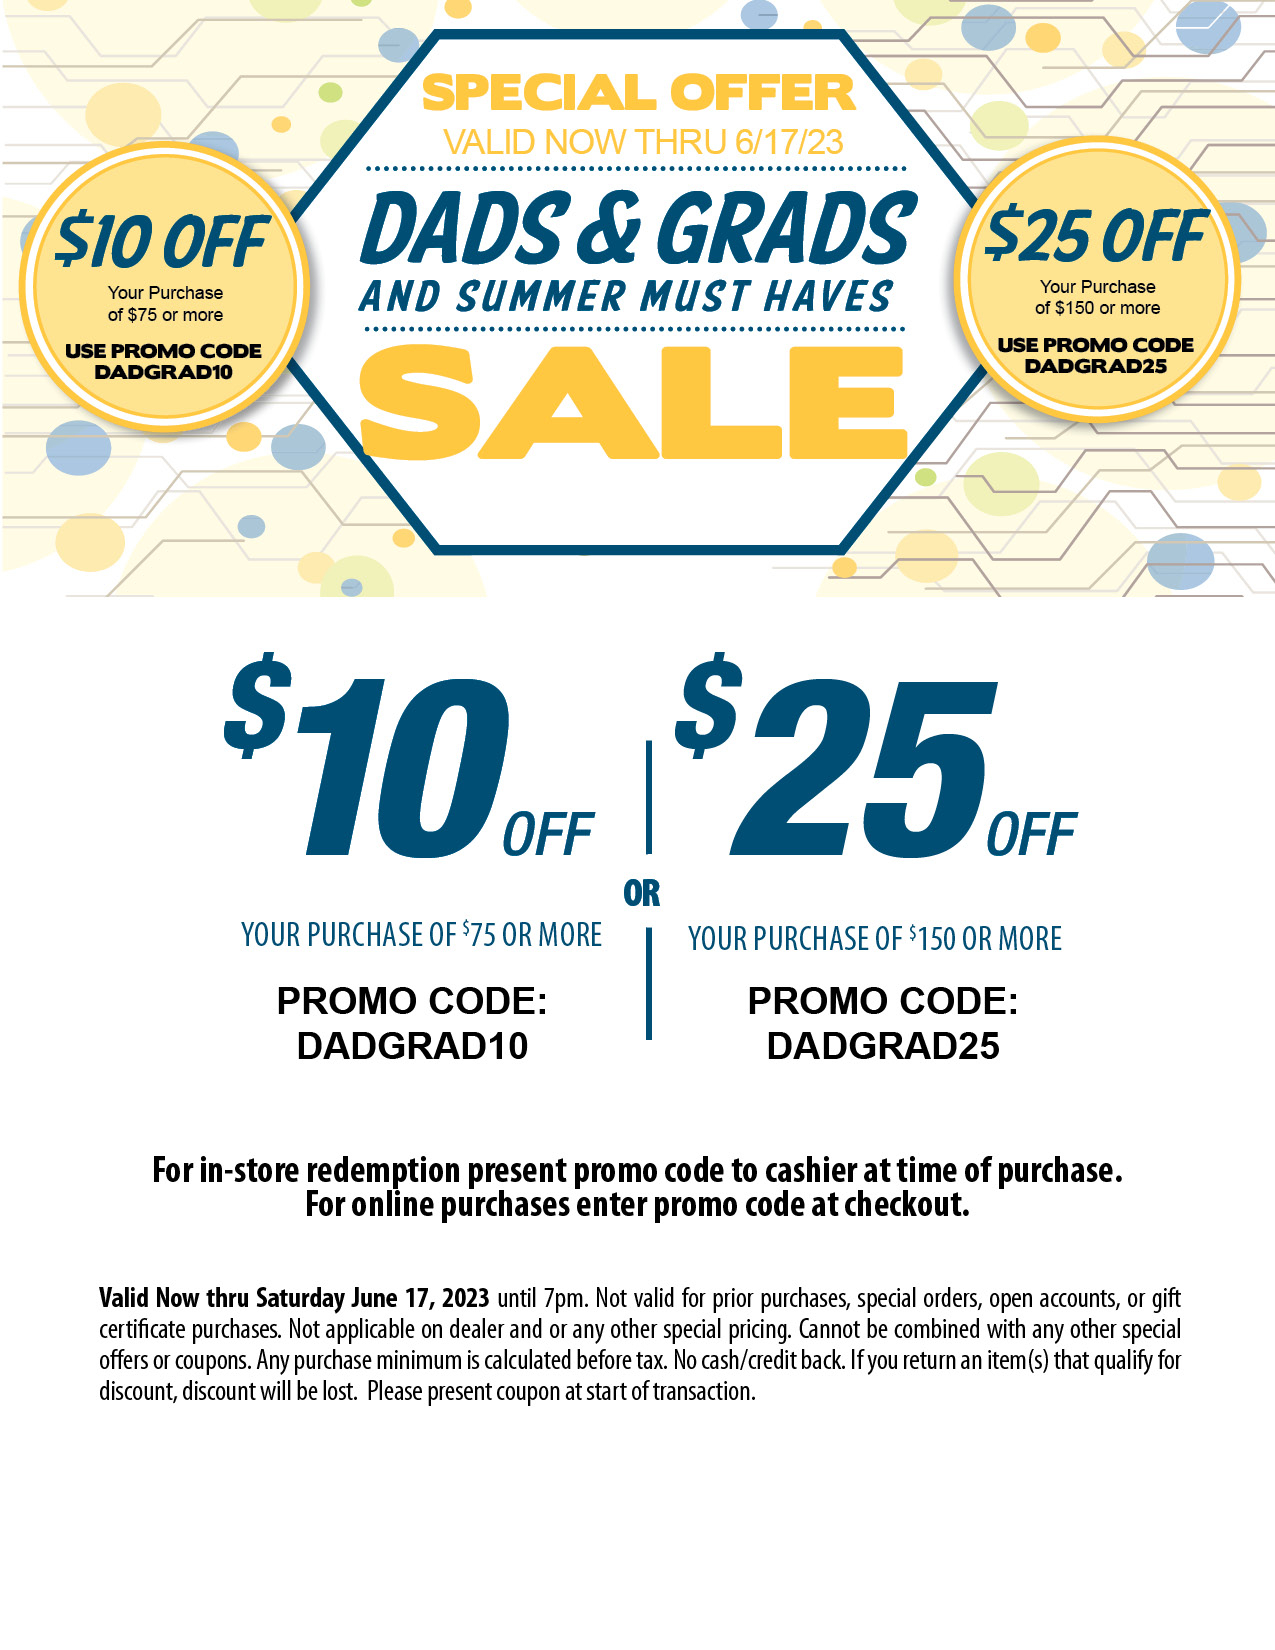 Dad and Grad Promo Coupon 2023